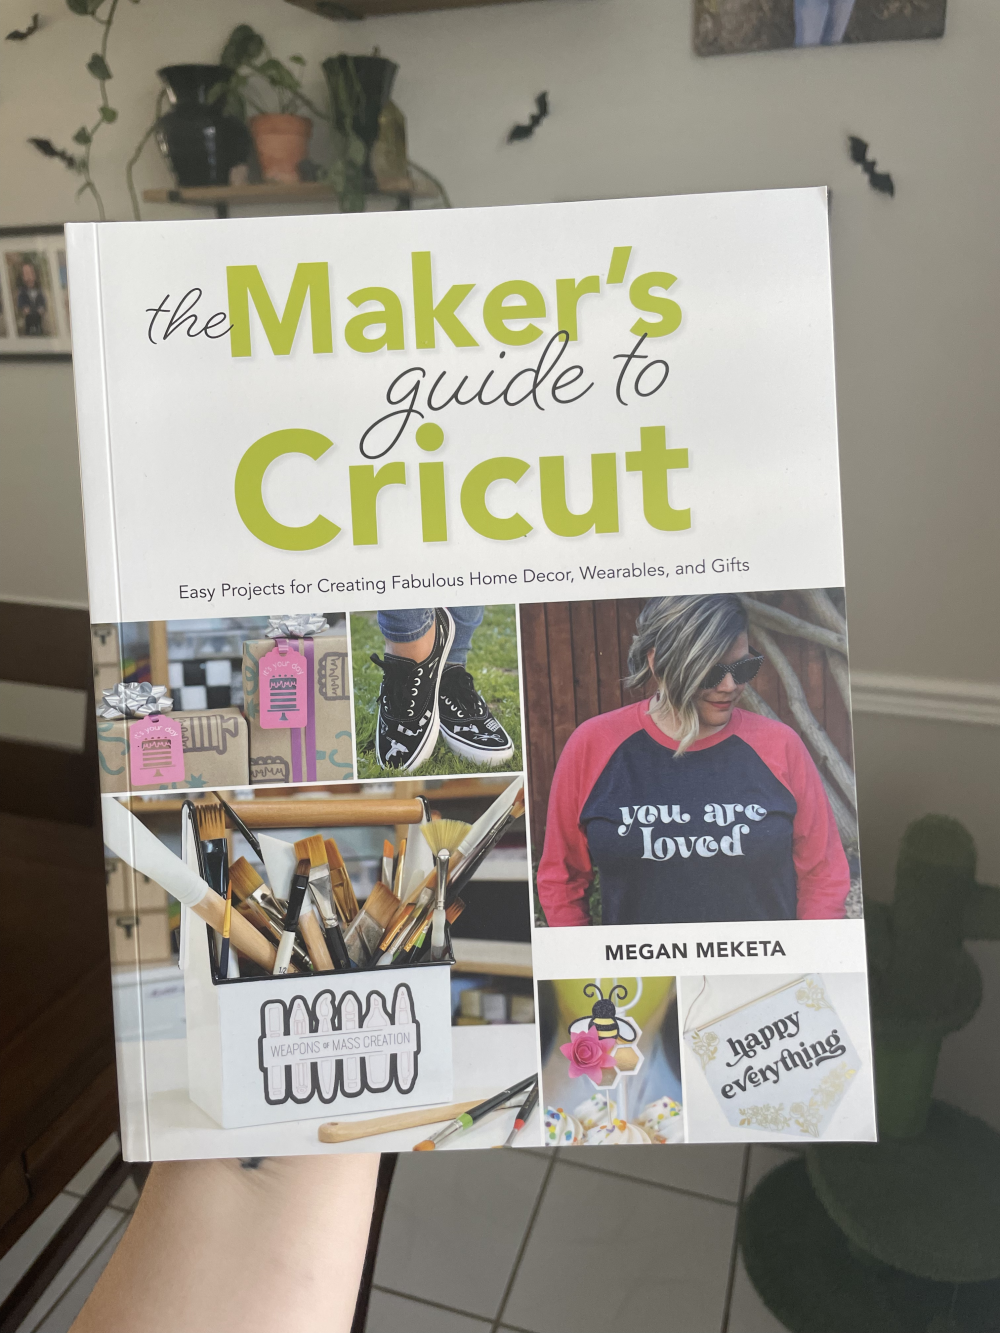 The Maker’s Guide to Cricut: Easy Projects for Creating Fabulous Home Decor, Wearables, and Gifts